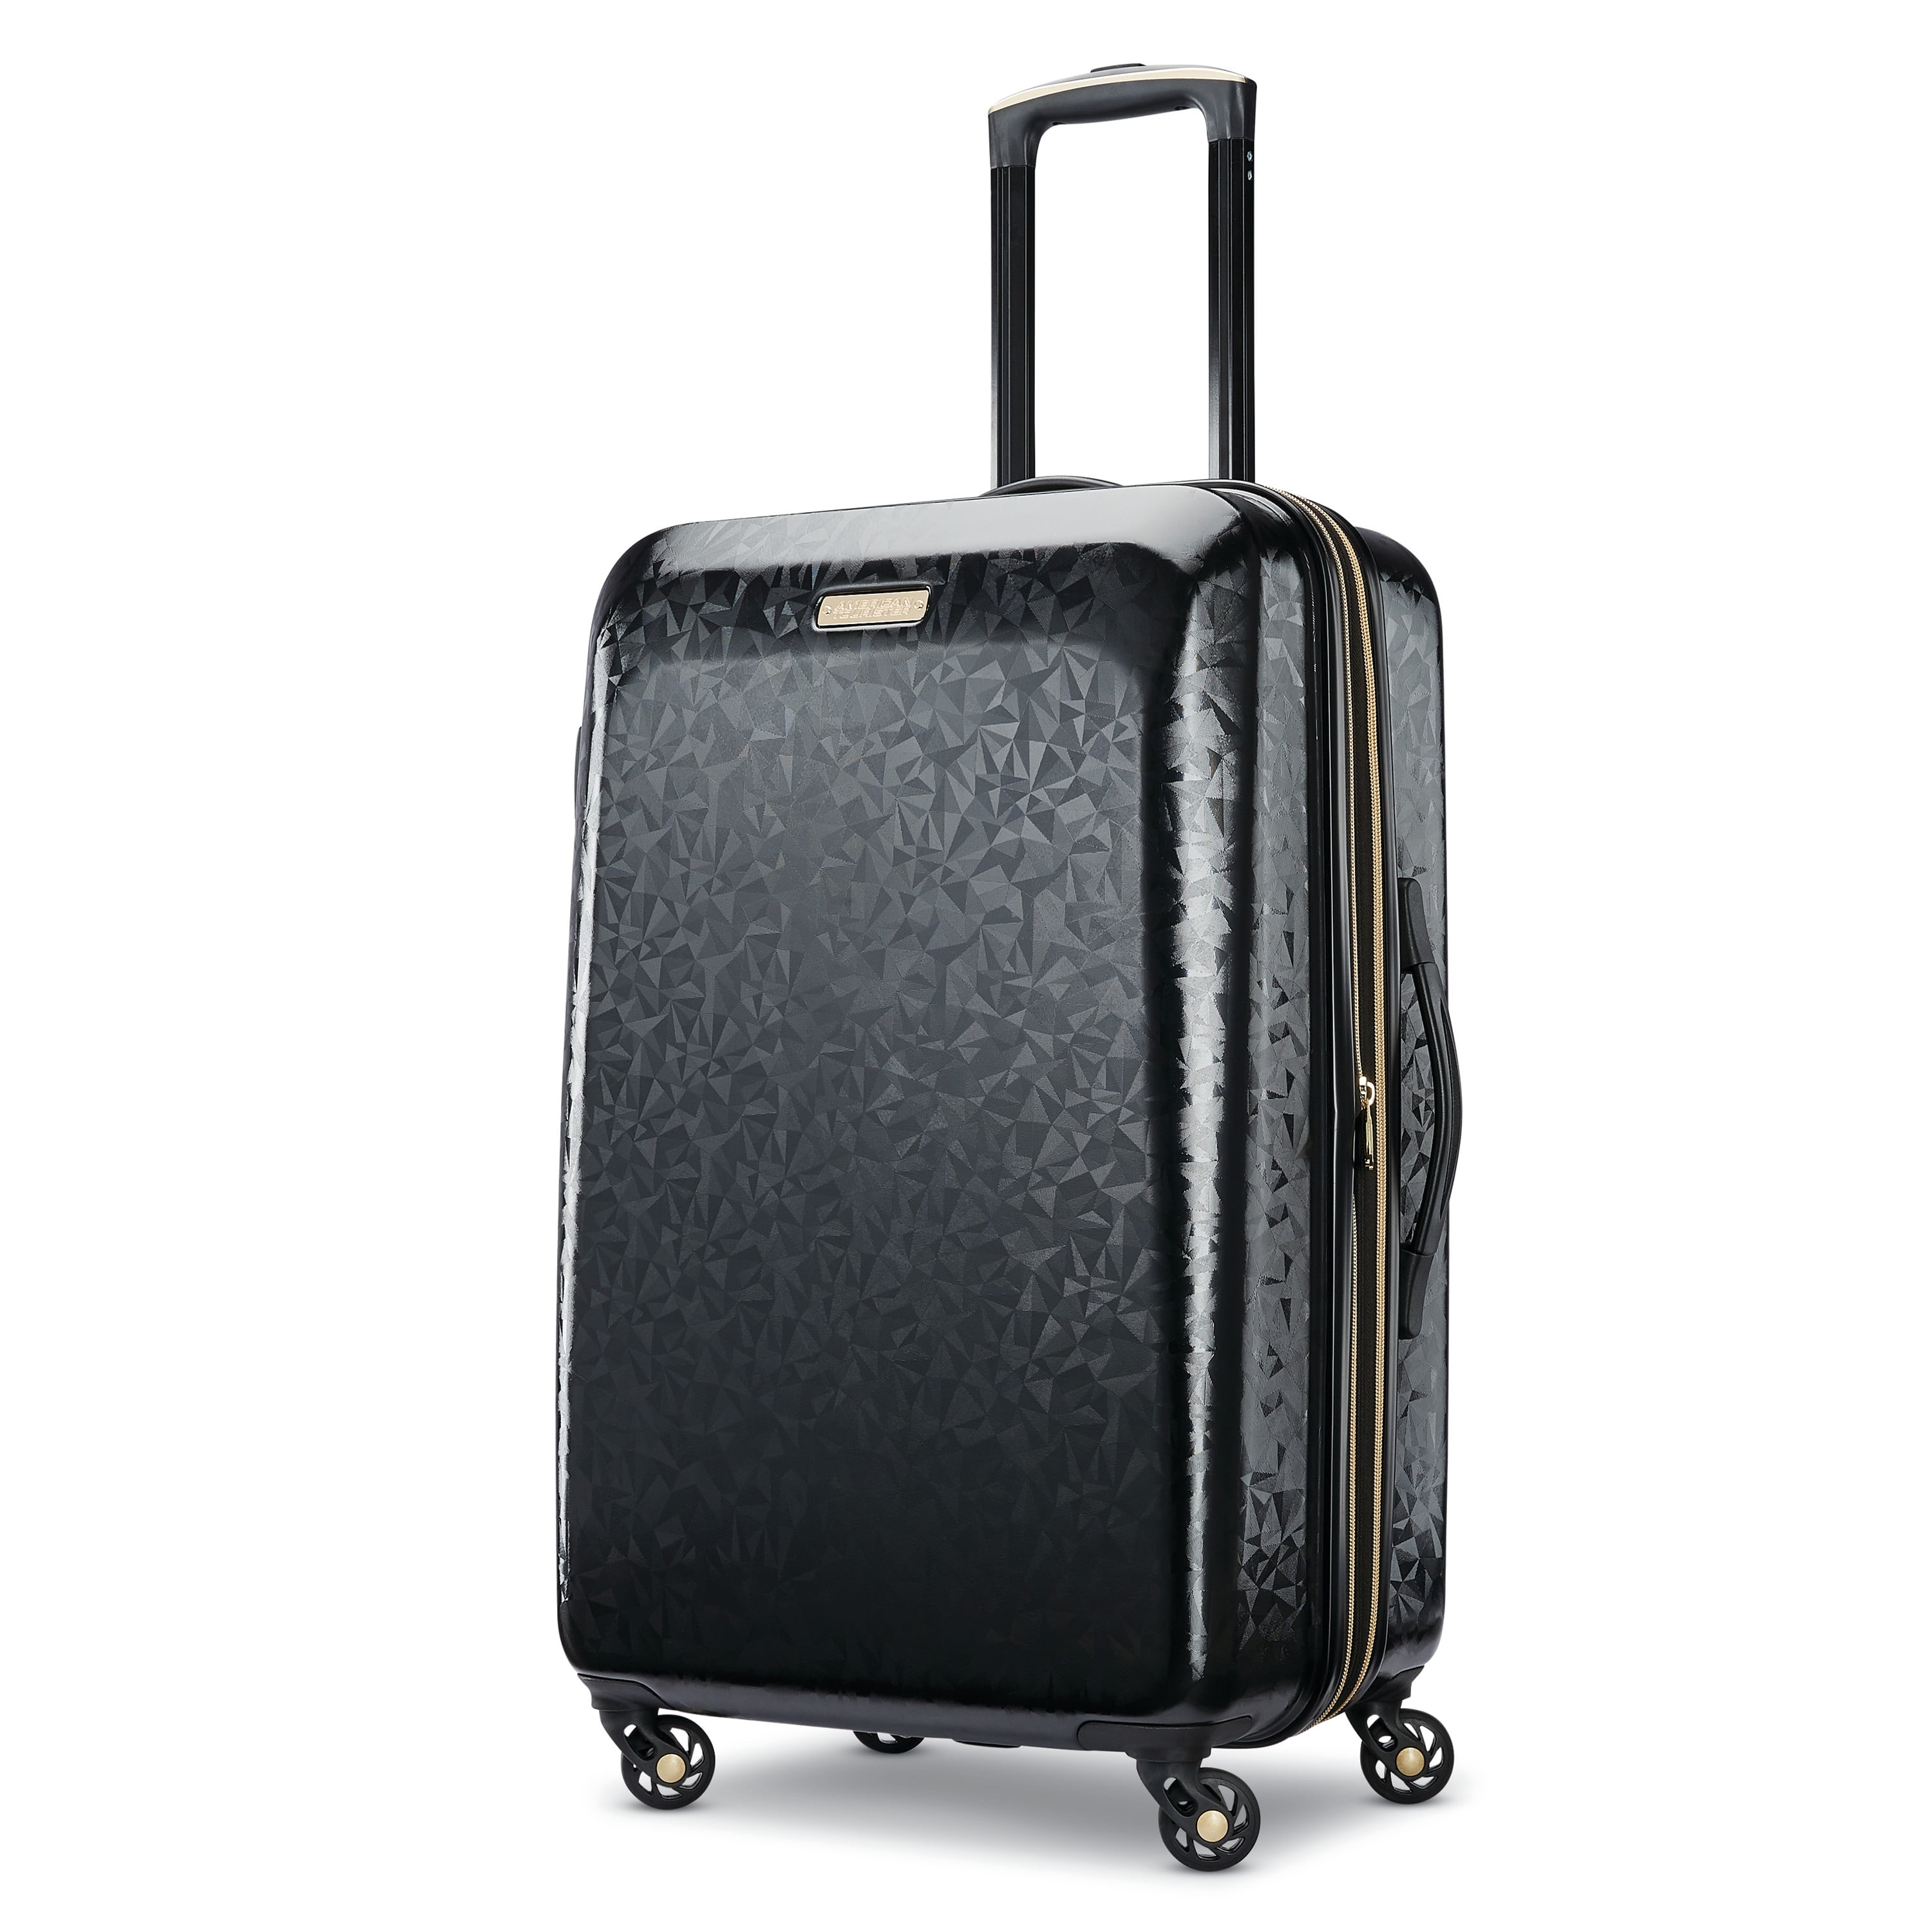 American Tourister Belle Voyage 20-inch Hardside Spinner, Carry-On Luggage,  One Piece 